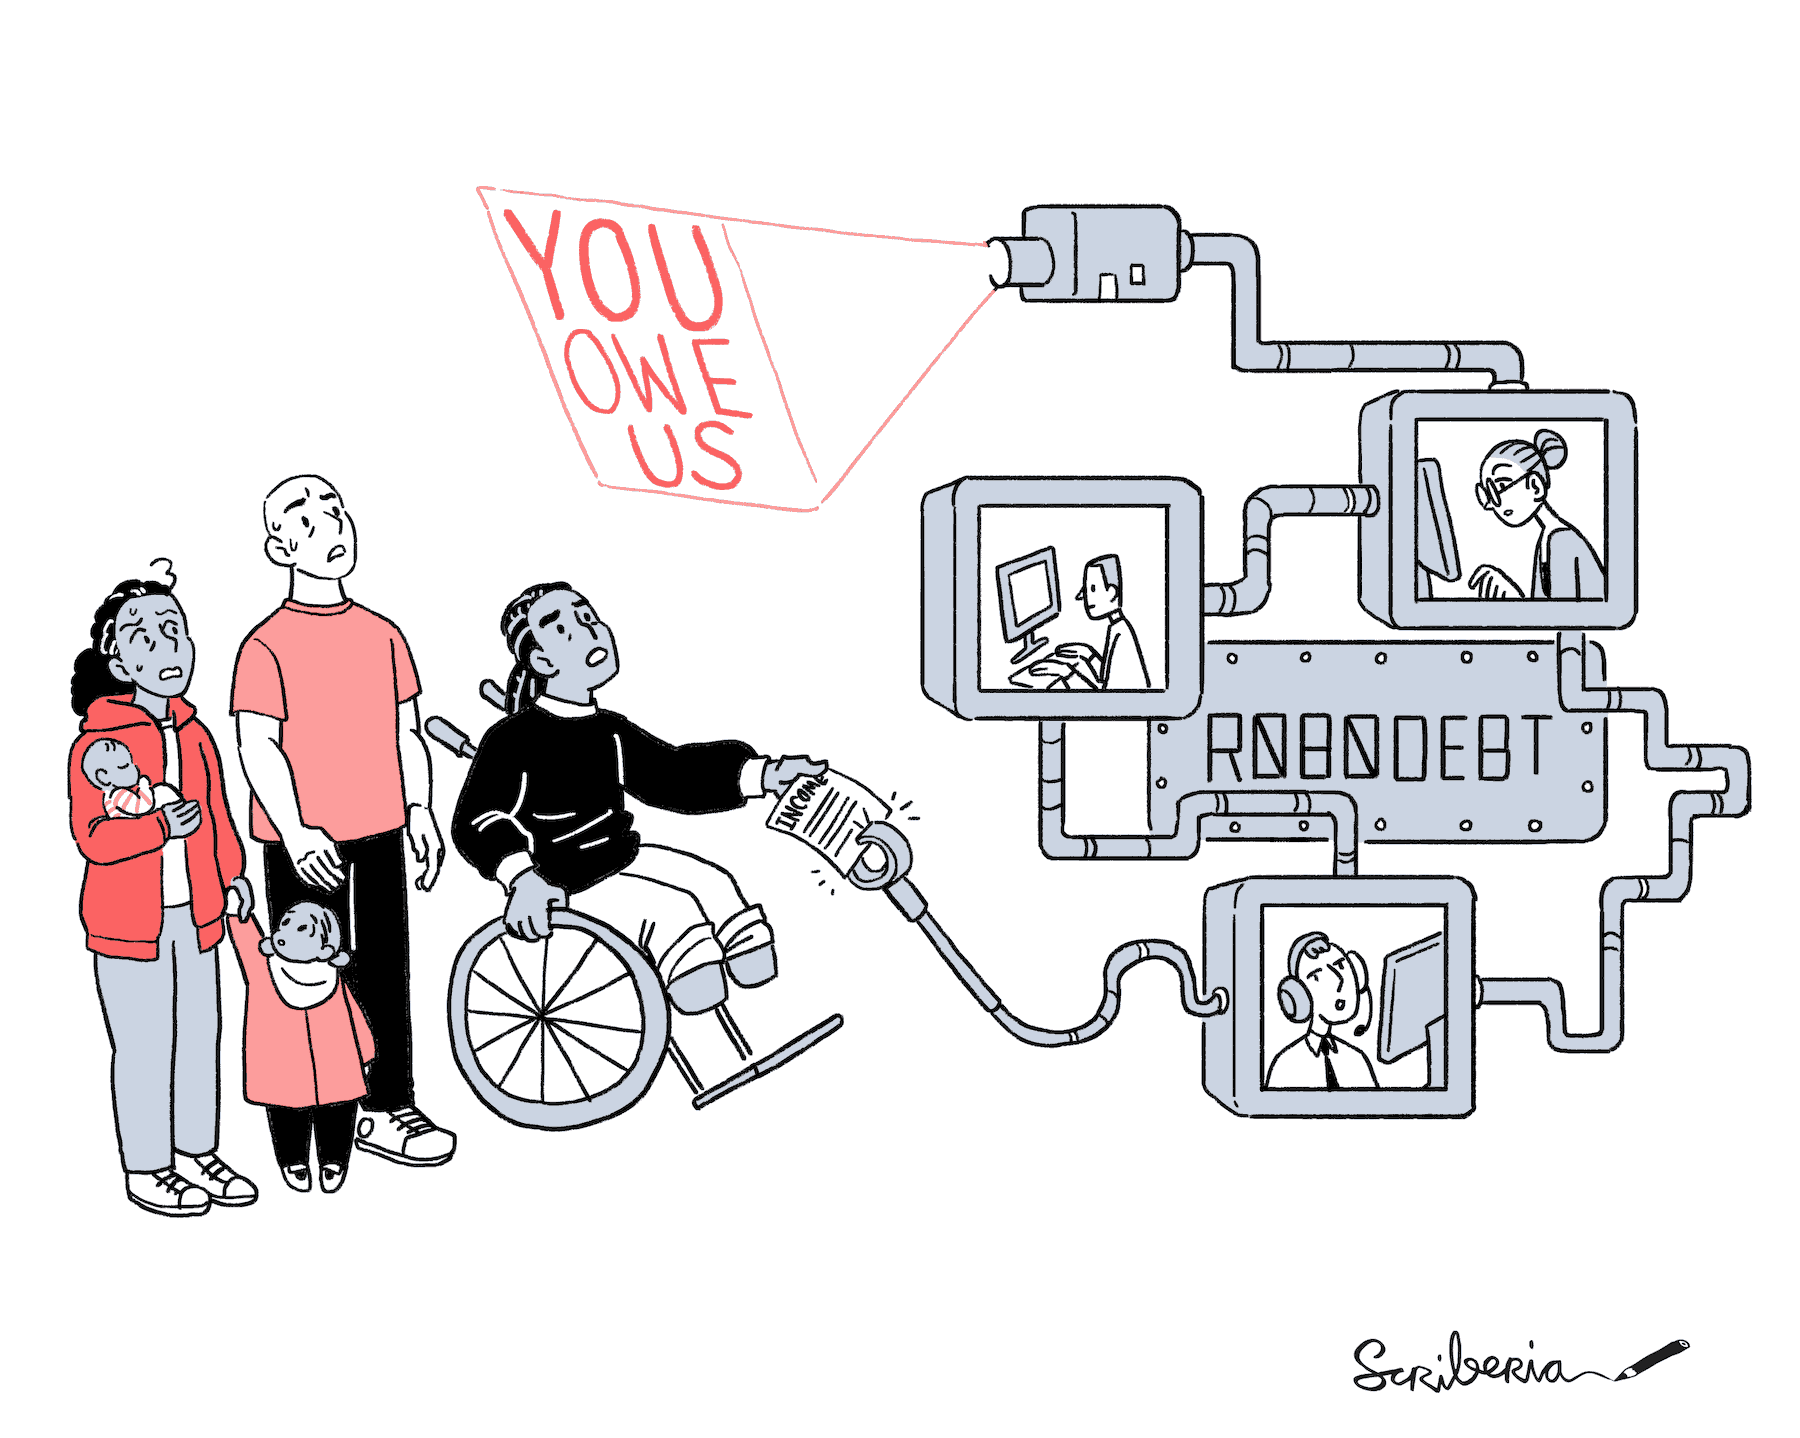 This illustration shows a big machine that says 'you owe us'. It has a few people automating debt call, which is impacting the low-income community - there is person on wheelchair, a tired looking mother with an infant and a toddler and a distressed man standing next to her.